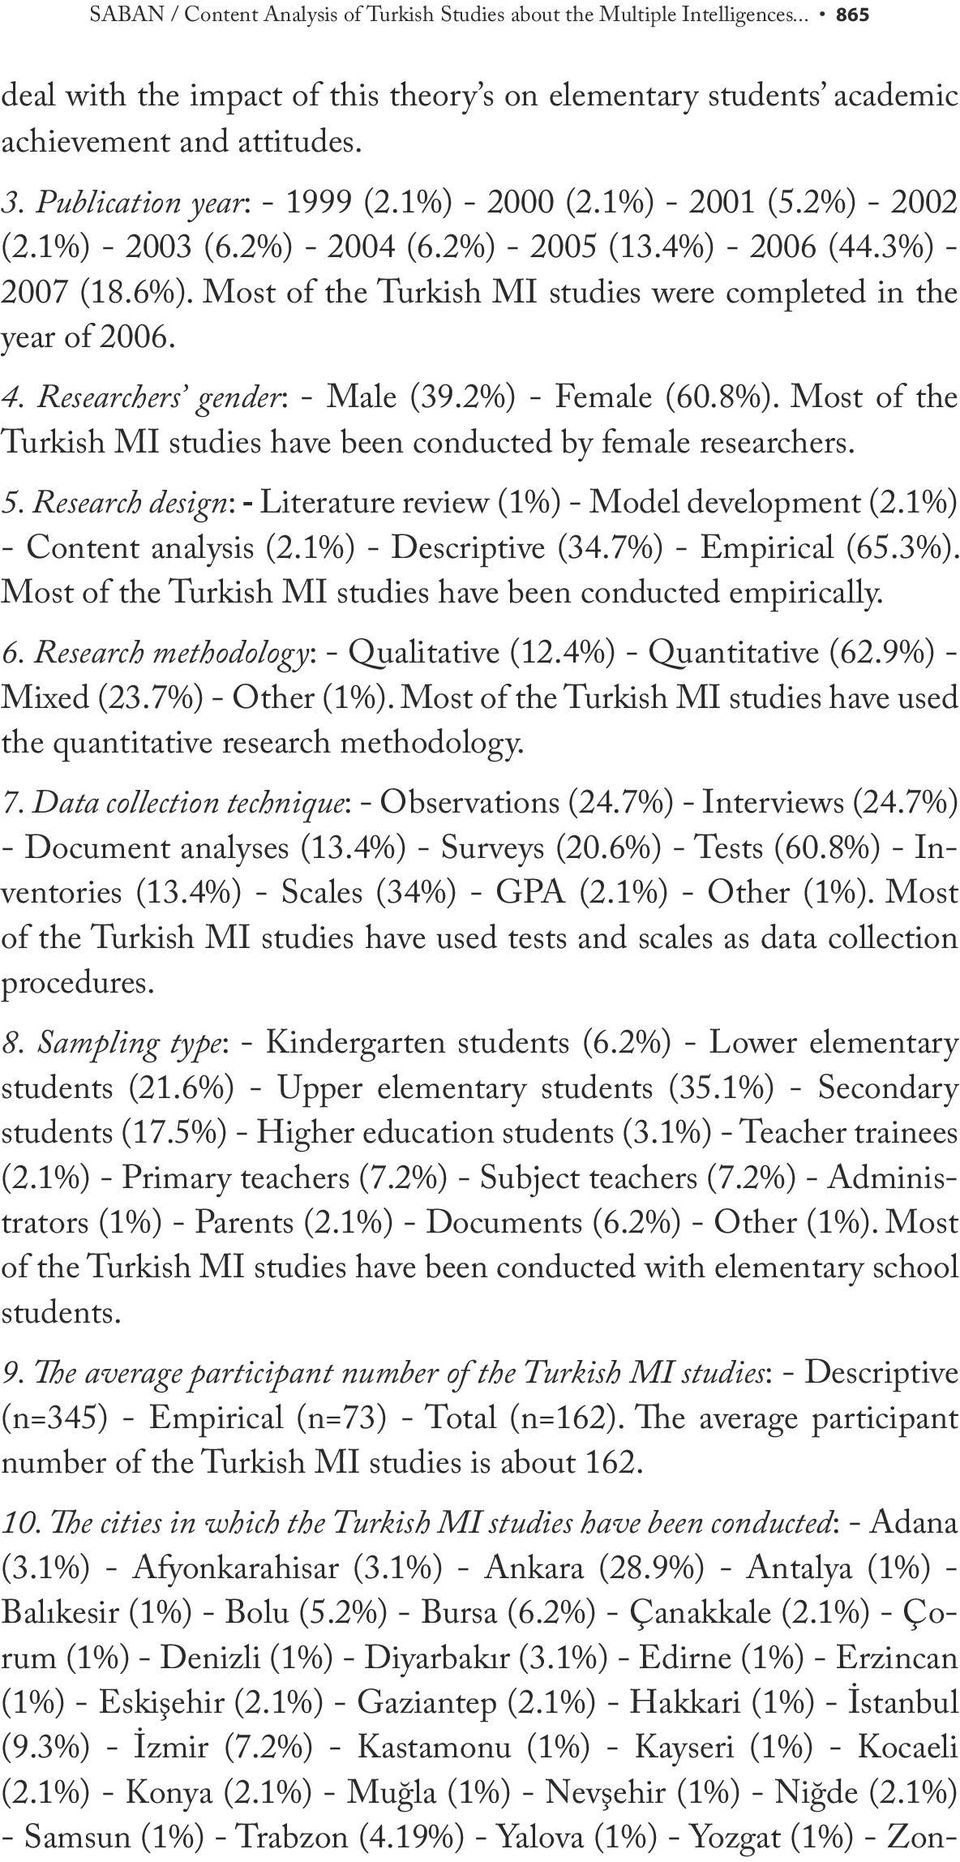 Most of the Turkish MI studies were completed in the year of 2006. 4. Researchers gender: - Male (39.2%) - Female (60.8%). Most of the Turkish MI studies have been conducted by female researchers. 5.